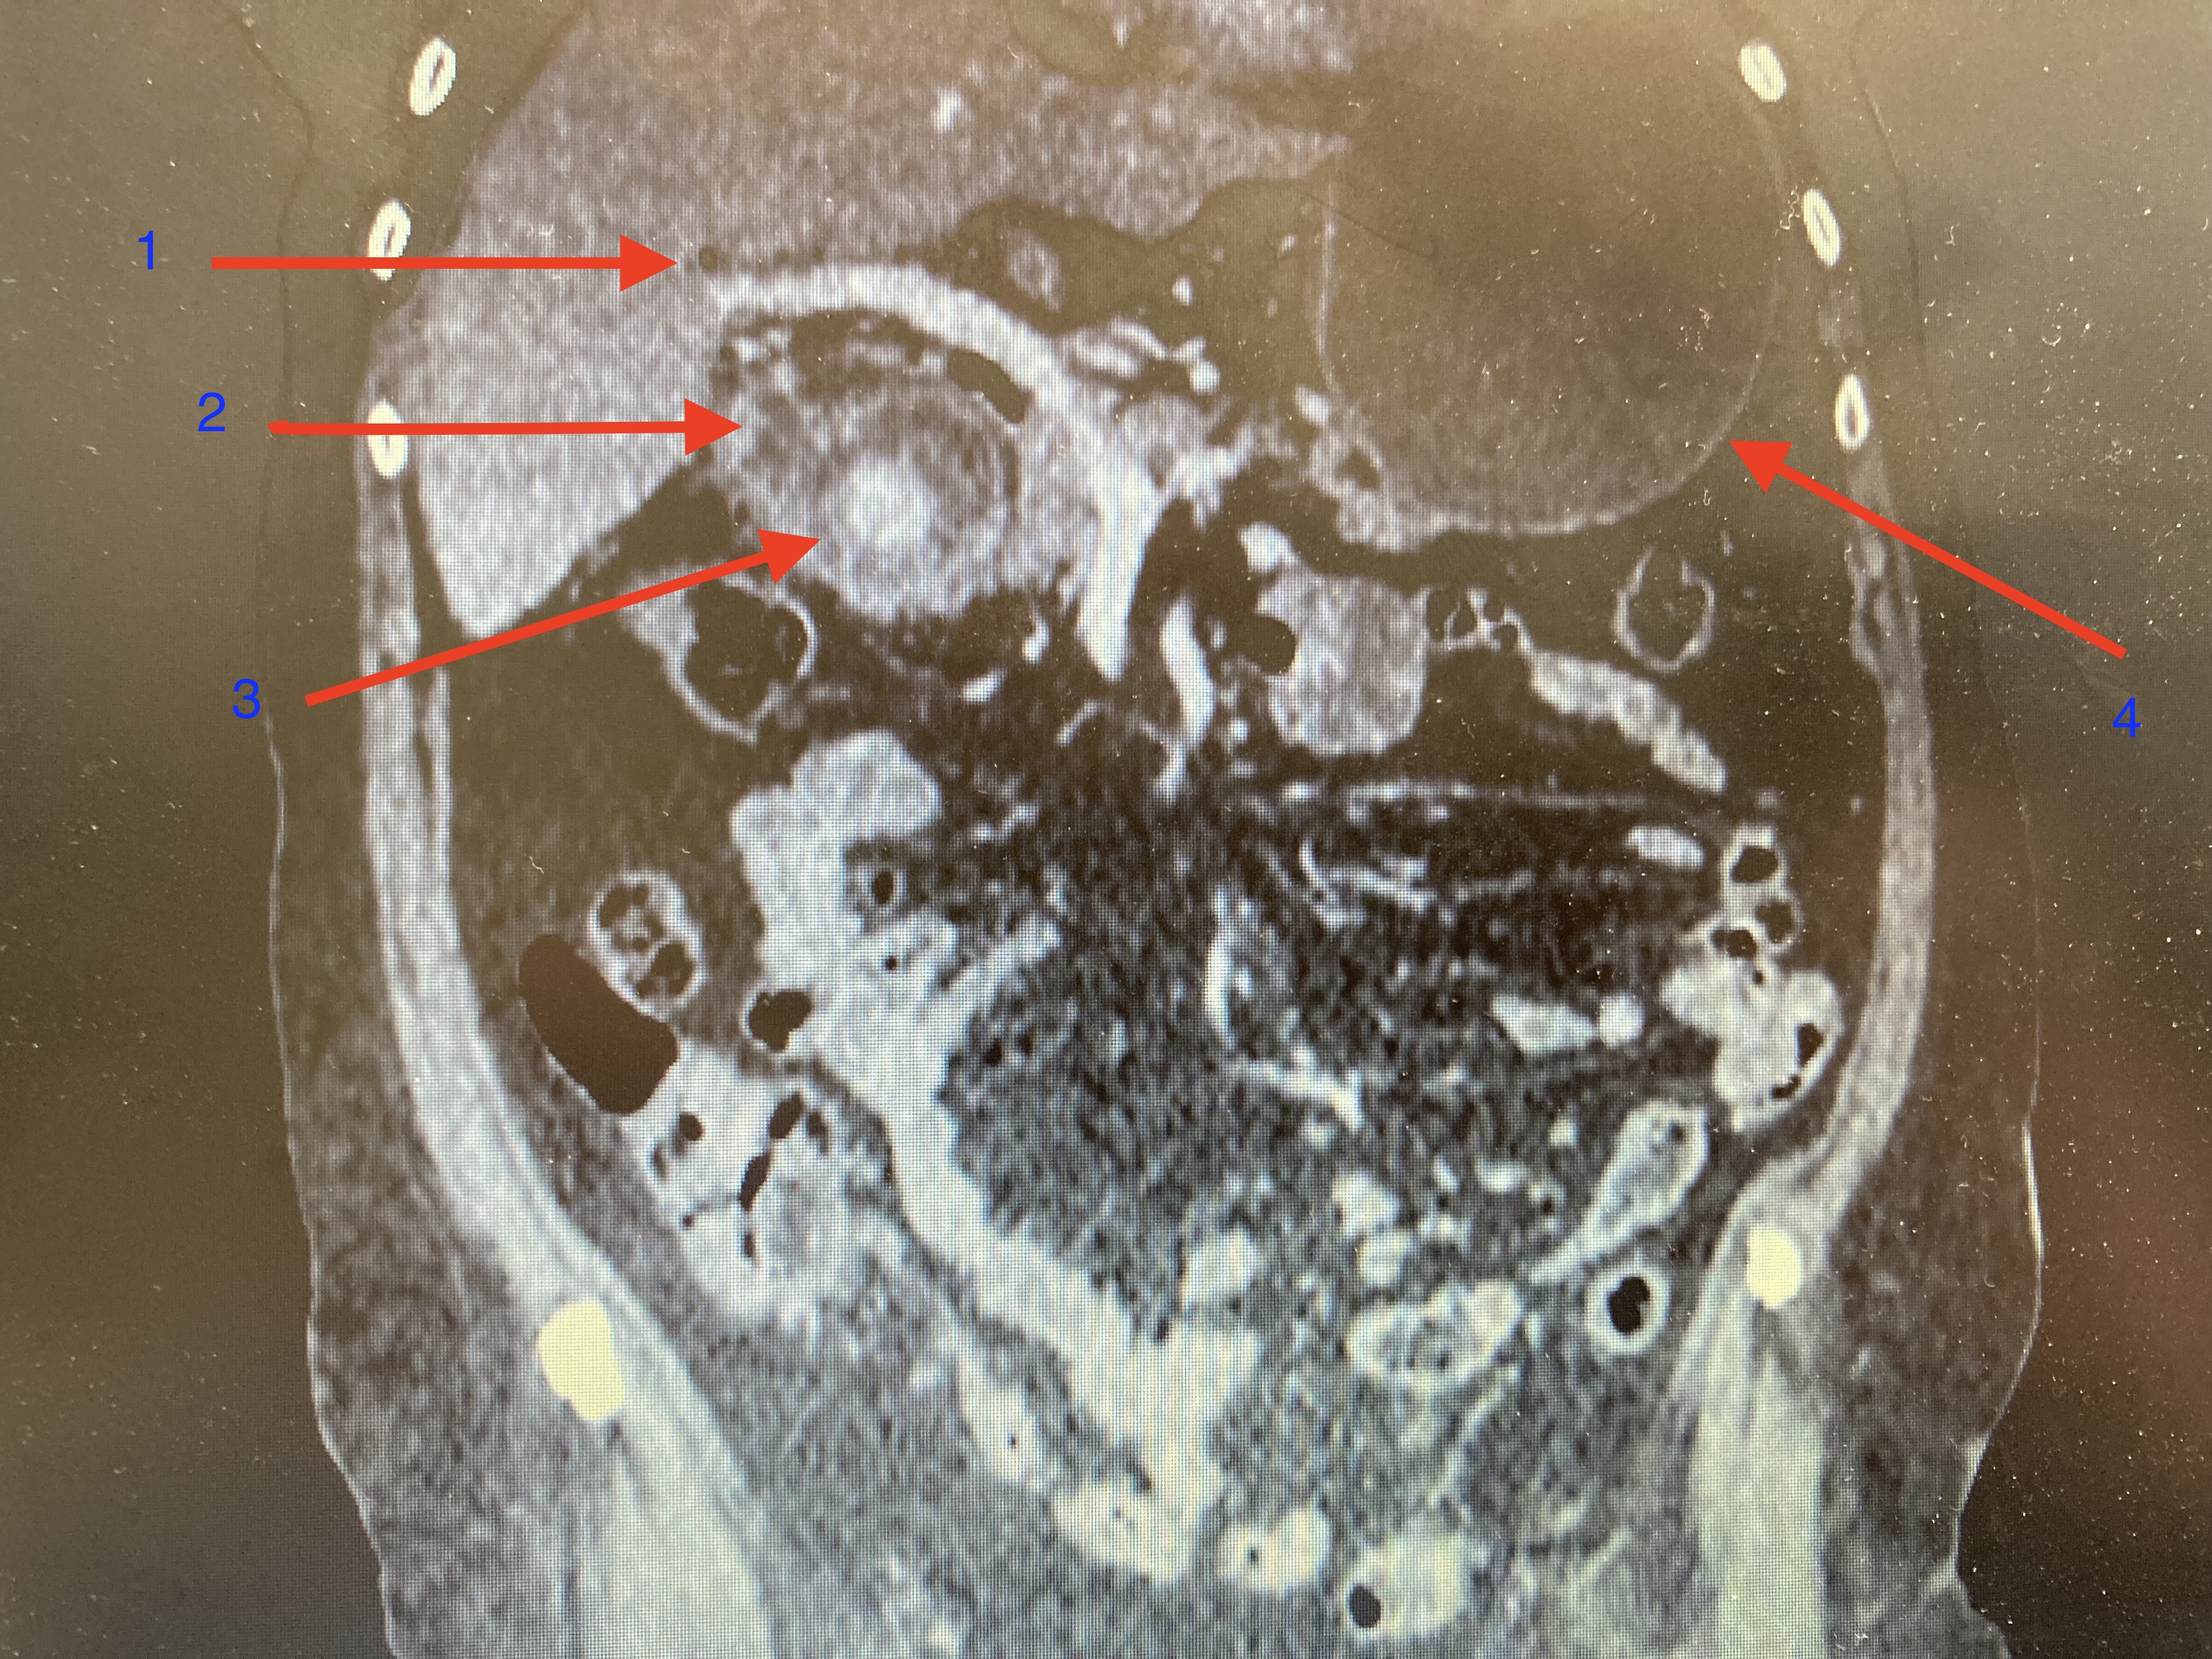 Initial computed tomography of the abdomen revealed typical bouveret syndrome with Rigler triad